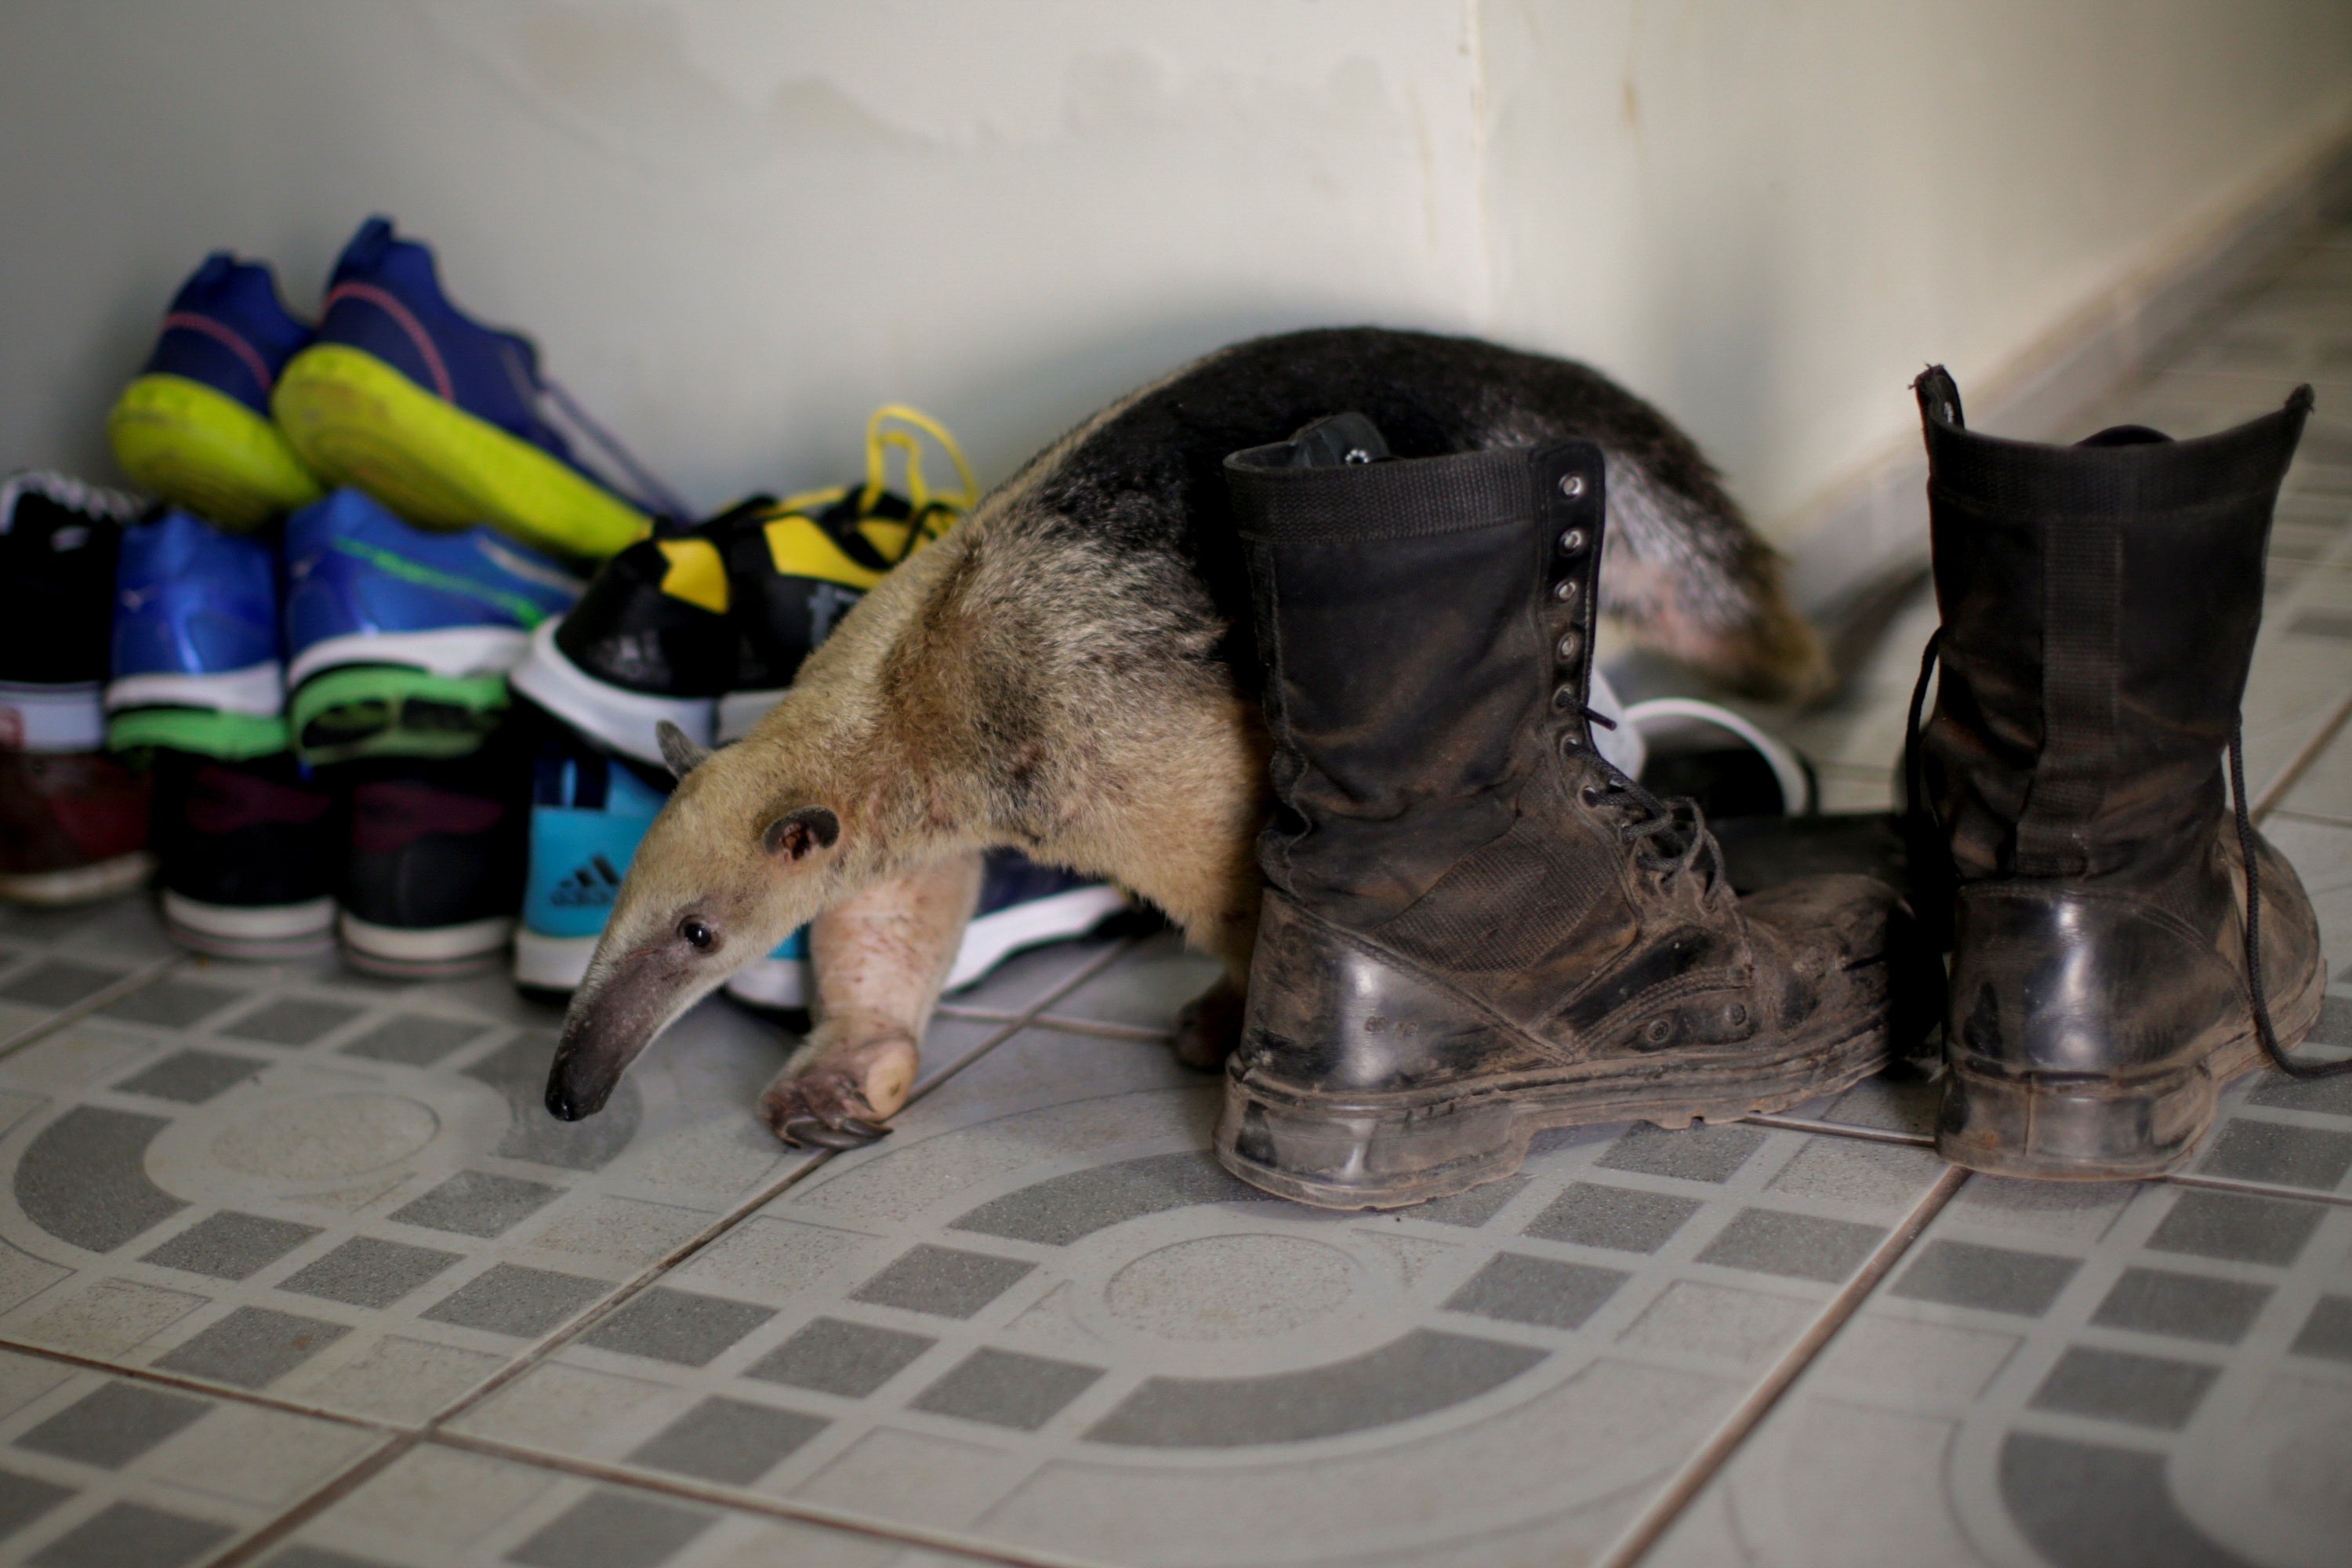 An anteater walks among shoes at veterinarian Marcelo Andreani’s house, where it’s receiving treatment. The anteater arrived with a broken left paw after a clash with a fierce porcupine